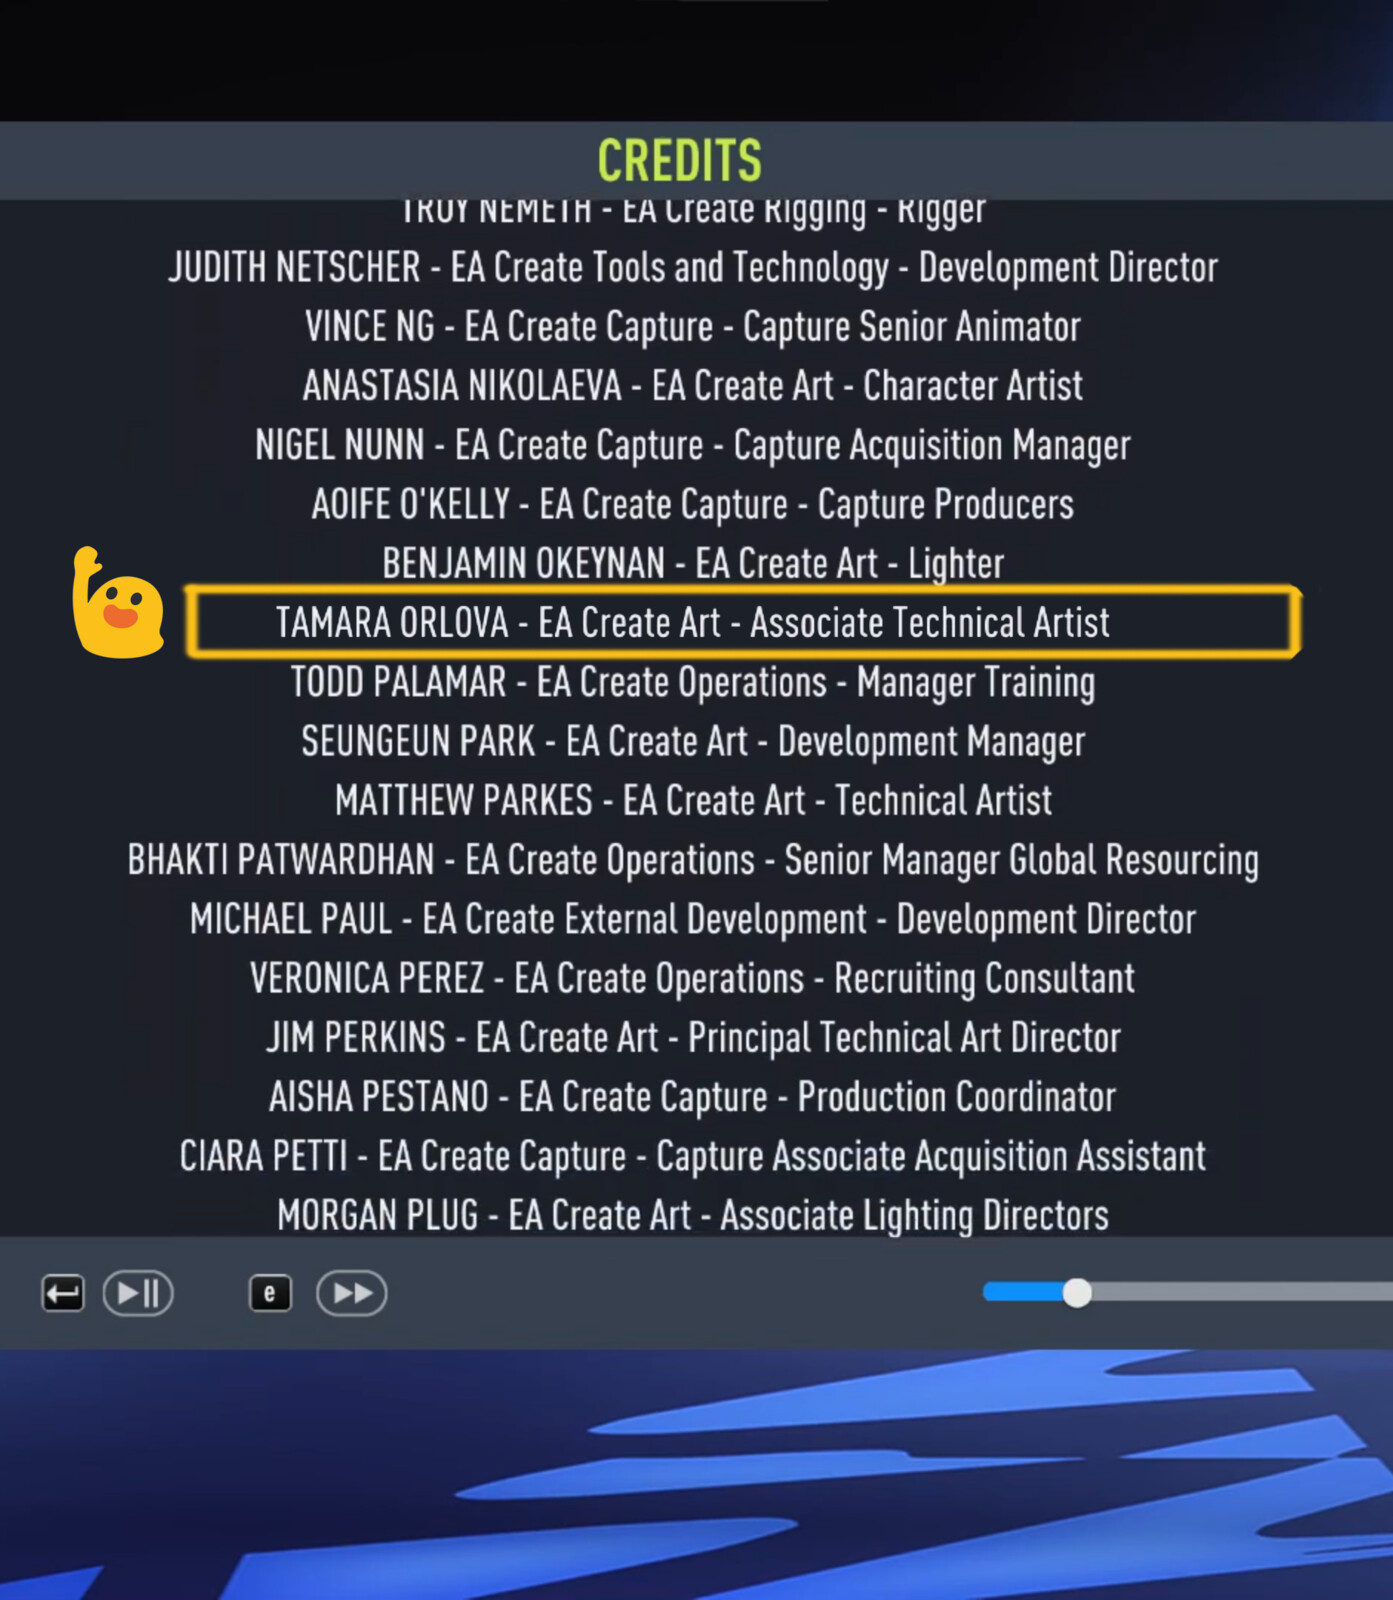 Securing a Spot in the Credits! 